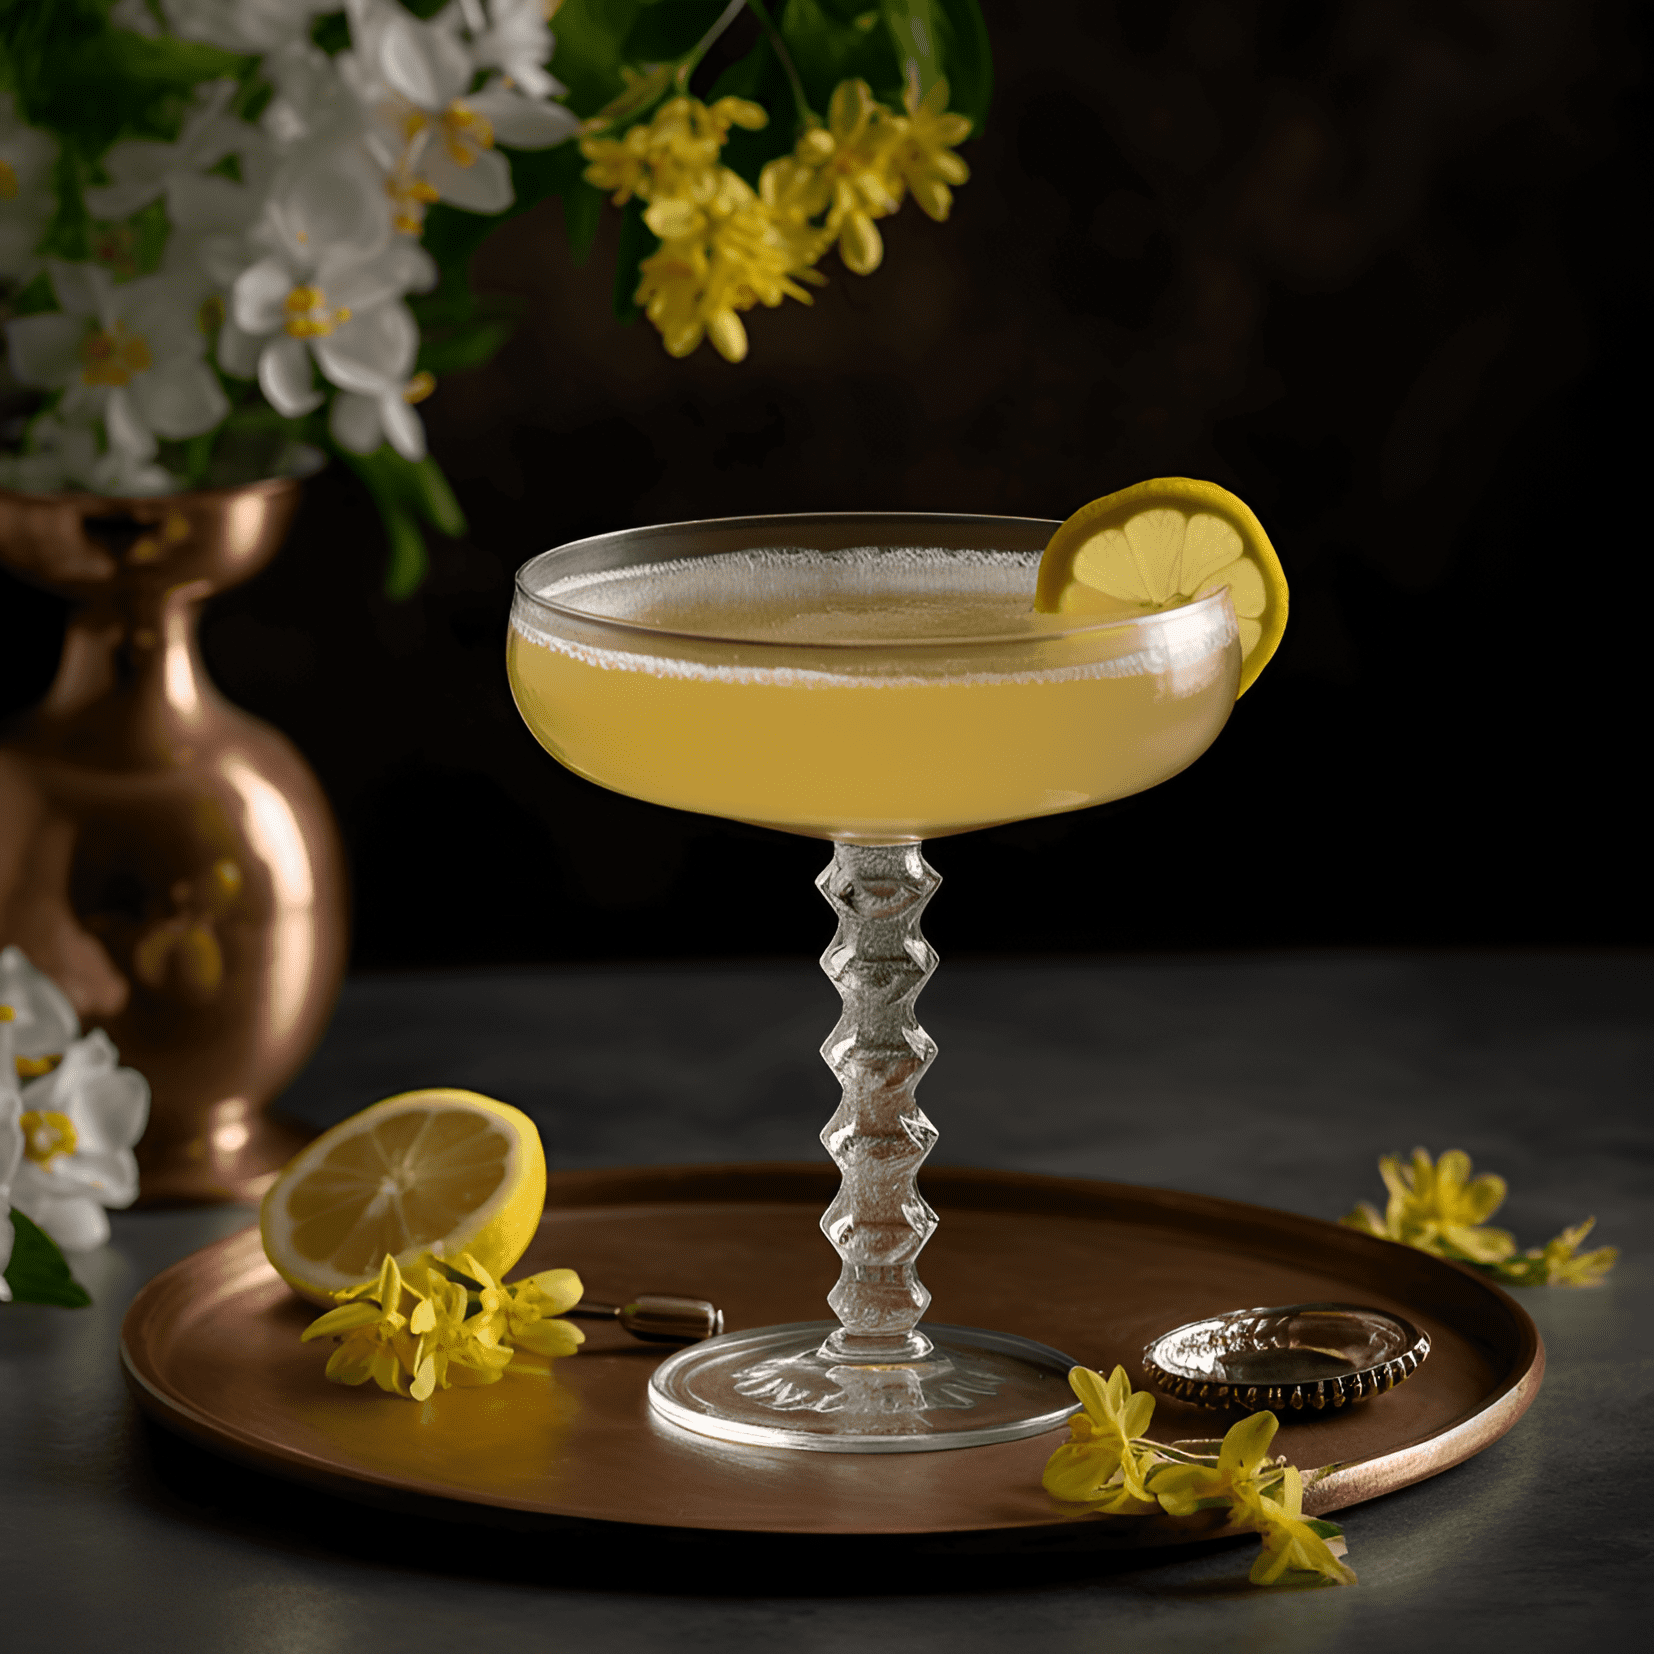 The Bee's Knees cocktail is a delightful balance of sweet, sour, and floral flavors. The honey syrup adds a rich sweetness, while the lemon juice provides a tangy, refreshing sourness. The gin's botanicals shine through, giving the drink a complex and satisfying taste.